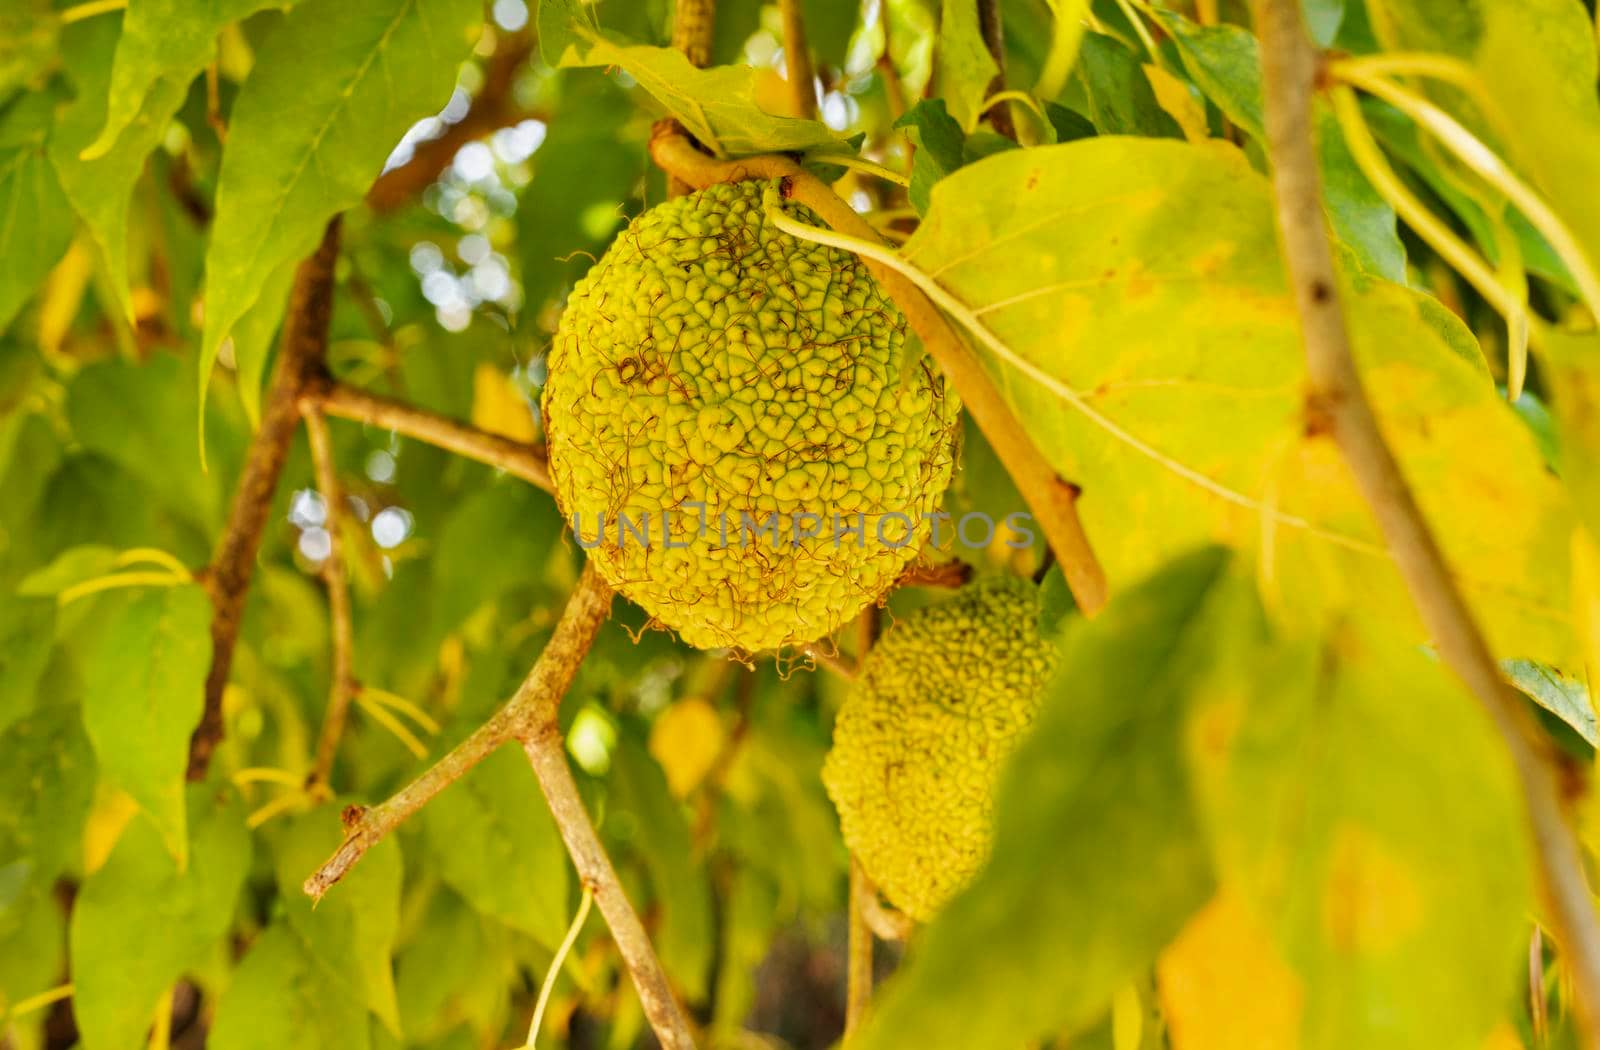 Yellow fruits of osage orange plant by victimewalker